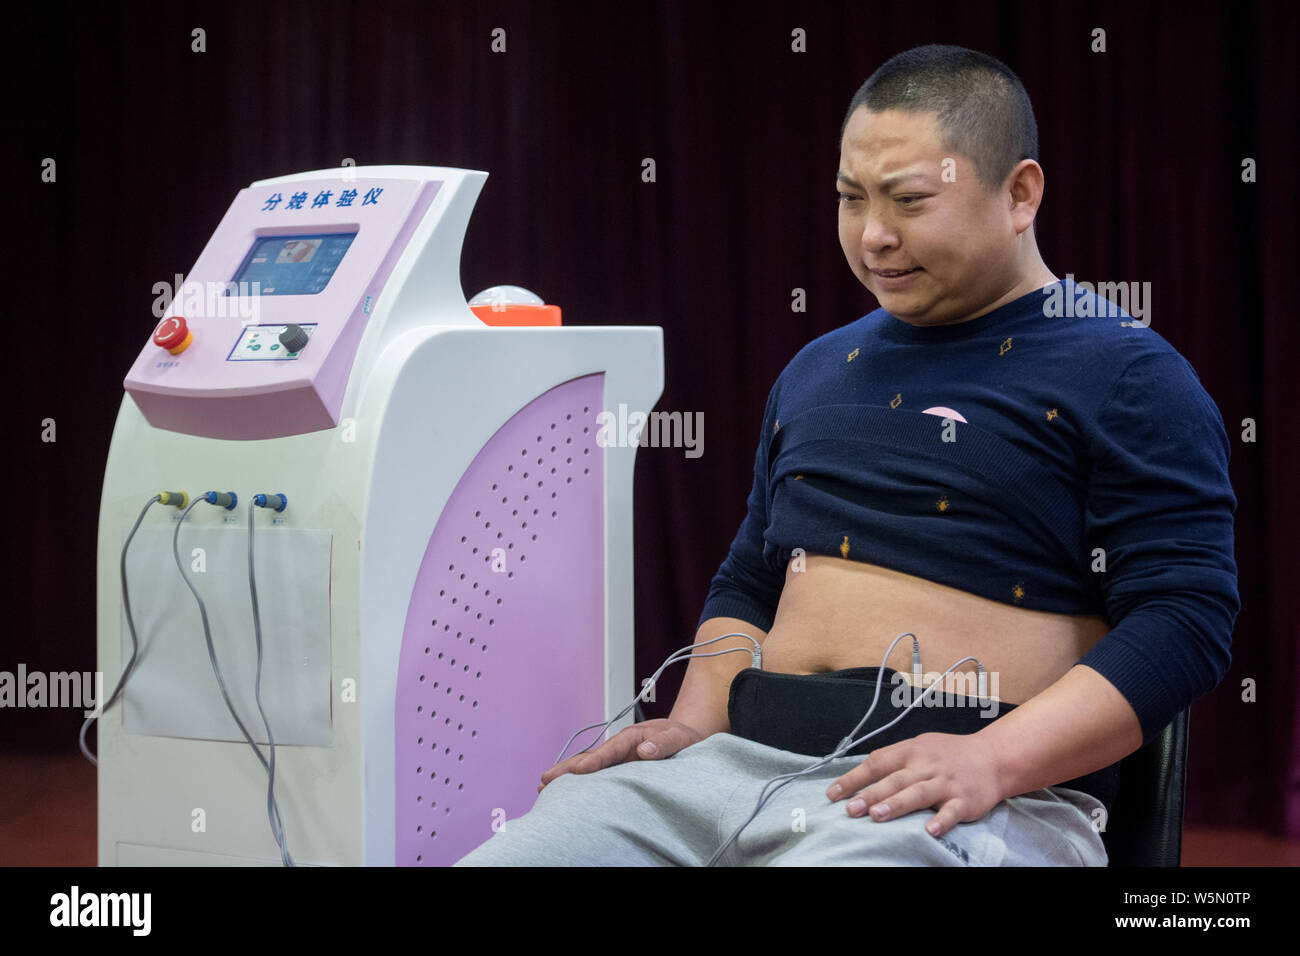 https://c8.alamy.com/comp/W5N0TP/the-face-of-an-expectant-father-contorts-as-he-experiences-the-pain-of-childbirth-via-a-simulation-machine-at-a-maternal-and-child-care-hospital-in-ta-W5N0TP.jpg